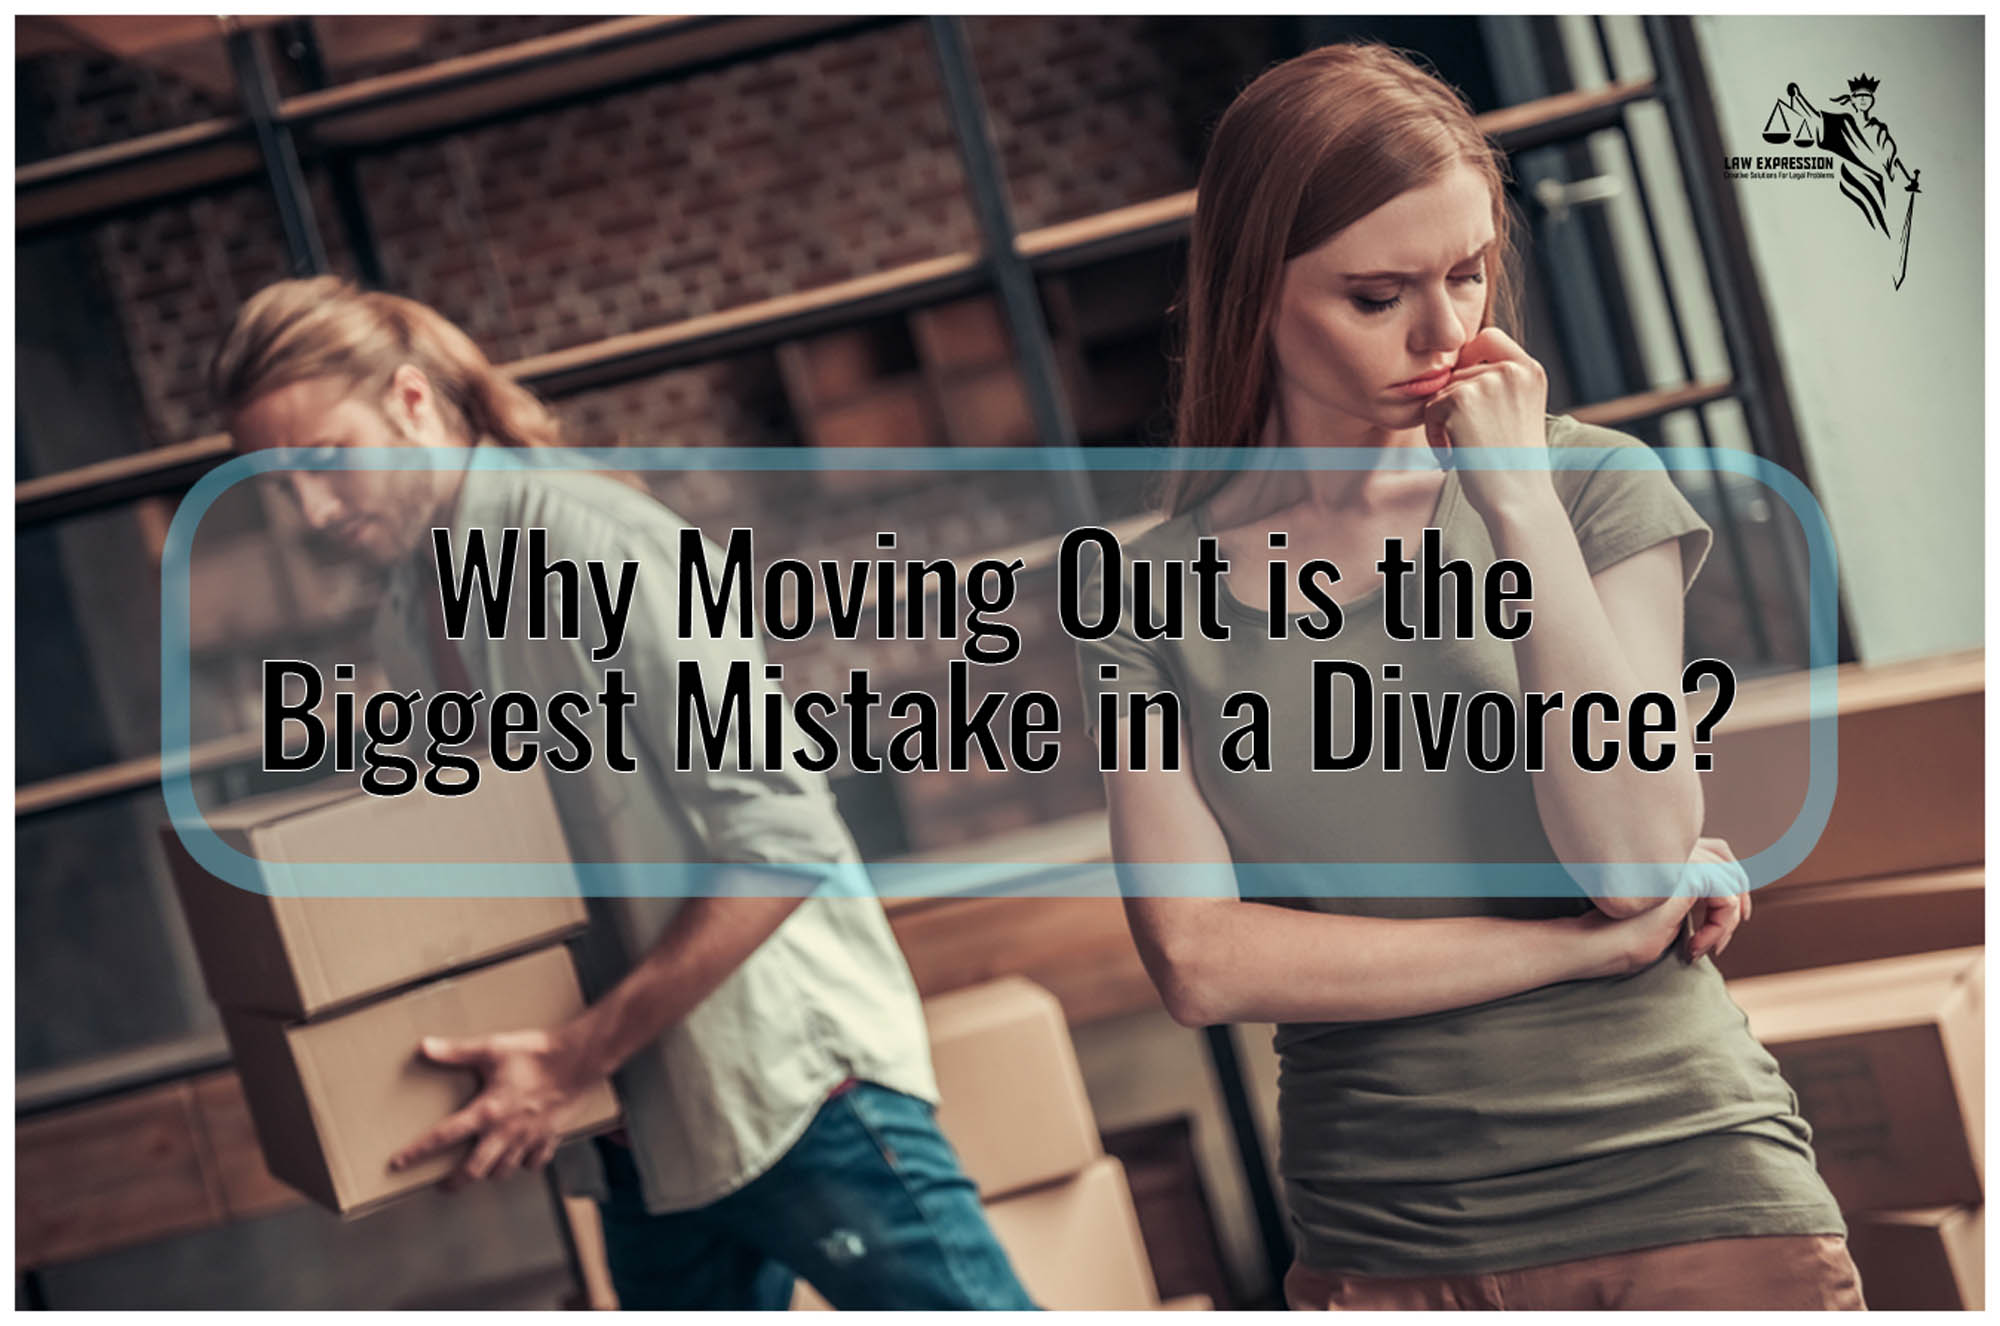 Why Moving Out is the Biggest Mistake in a Divorce